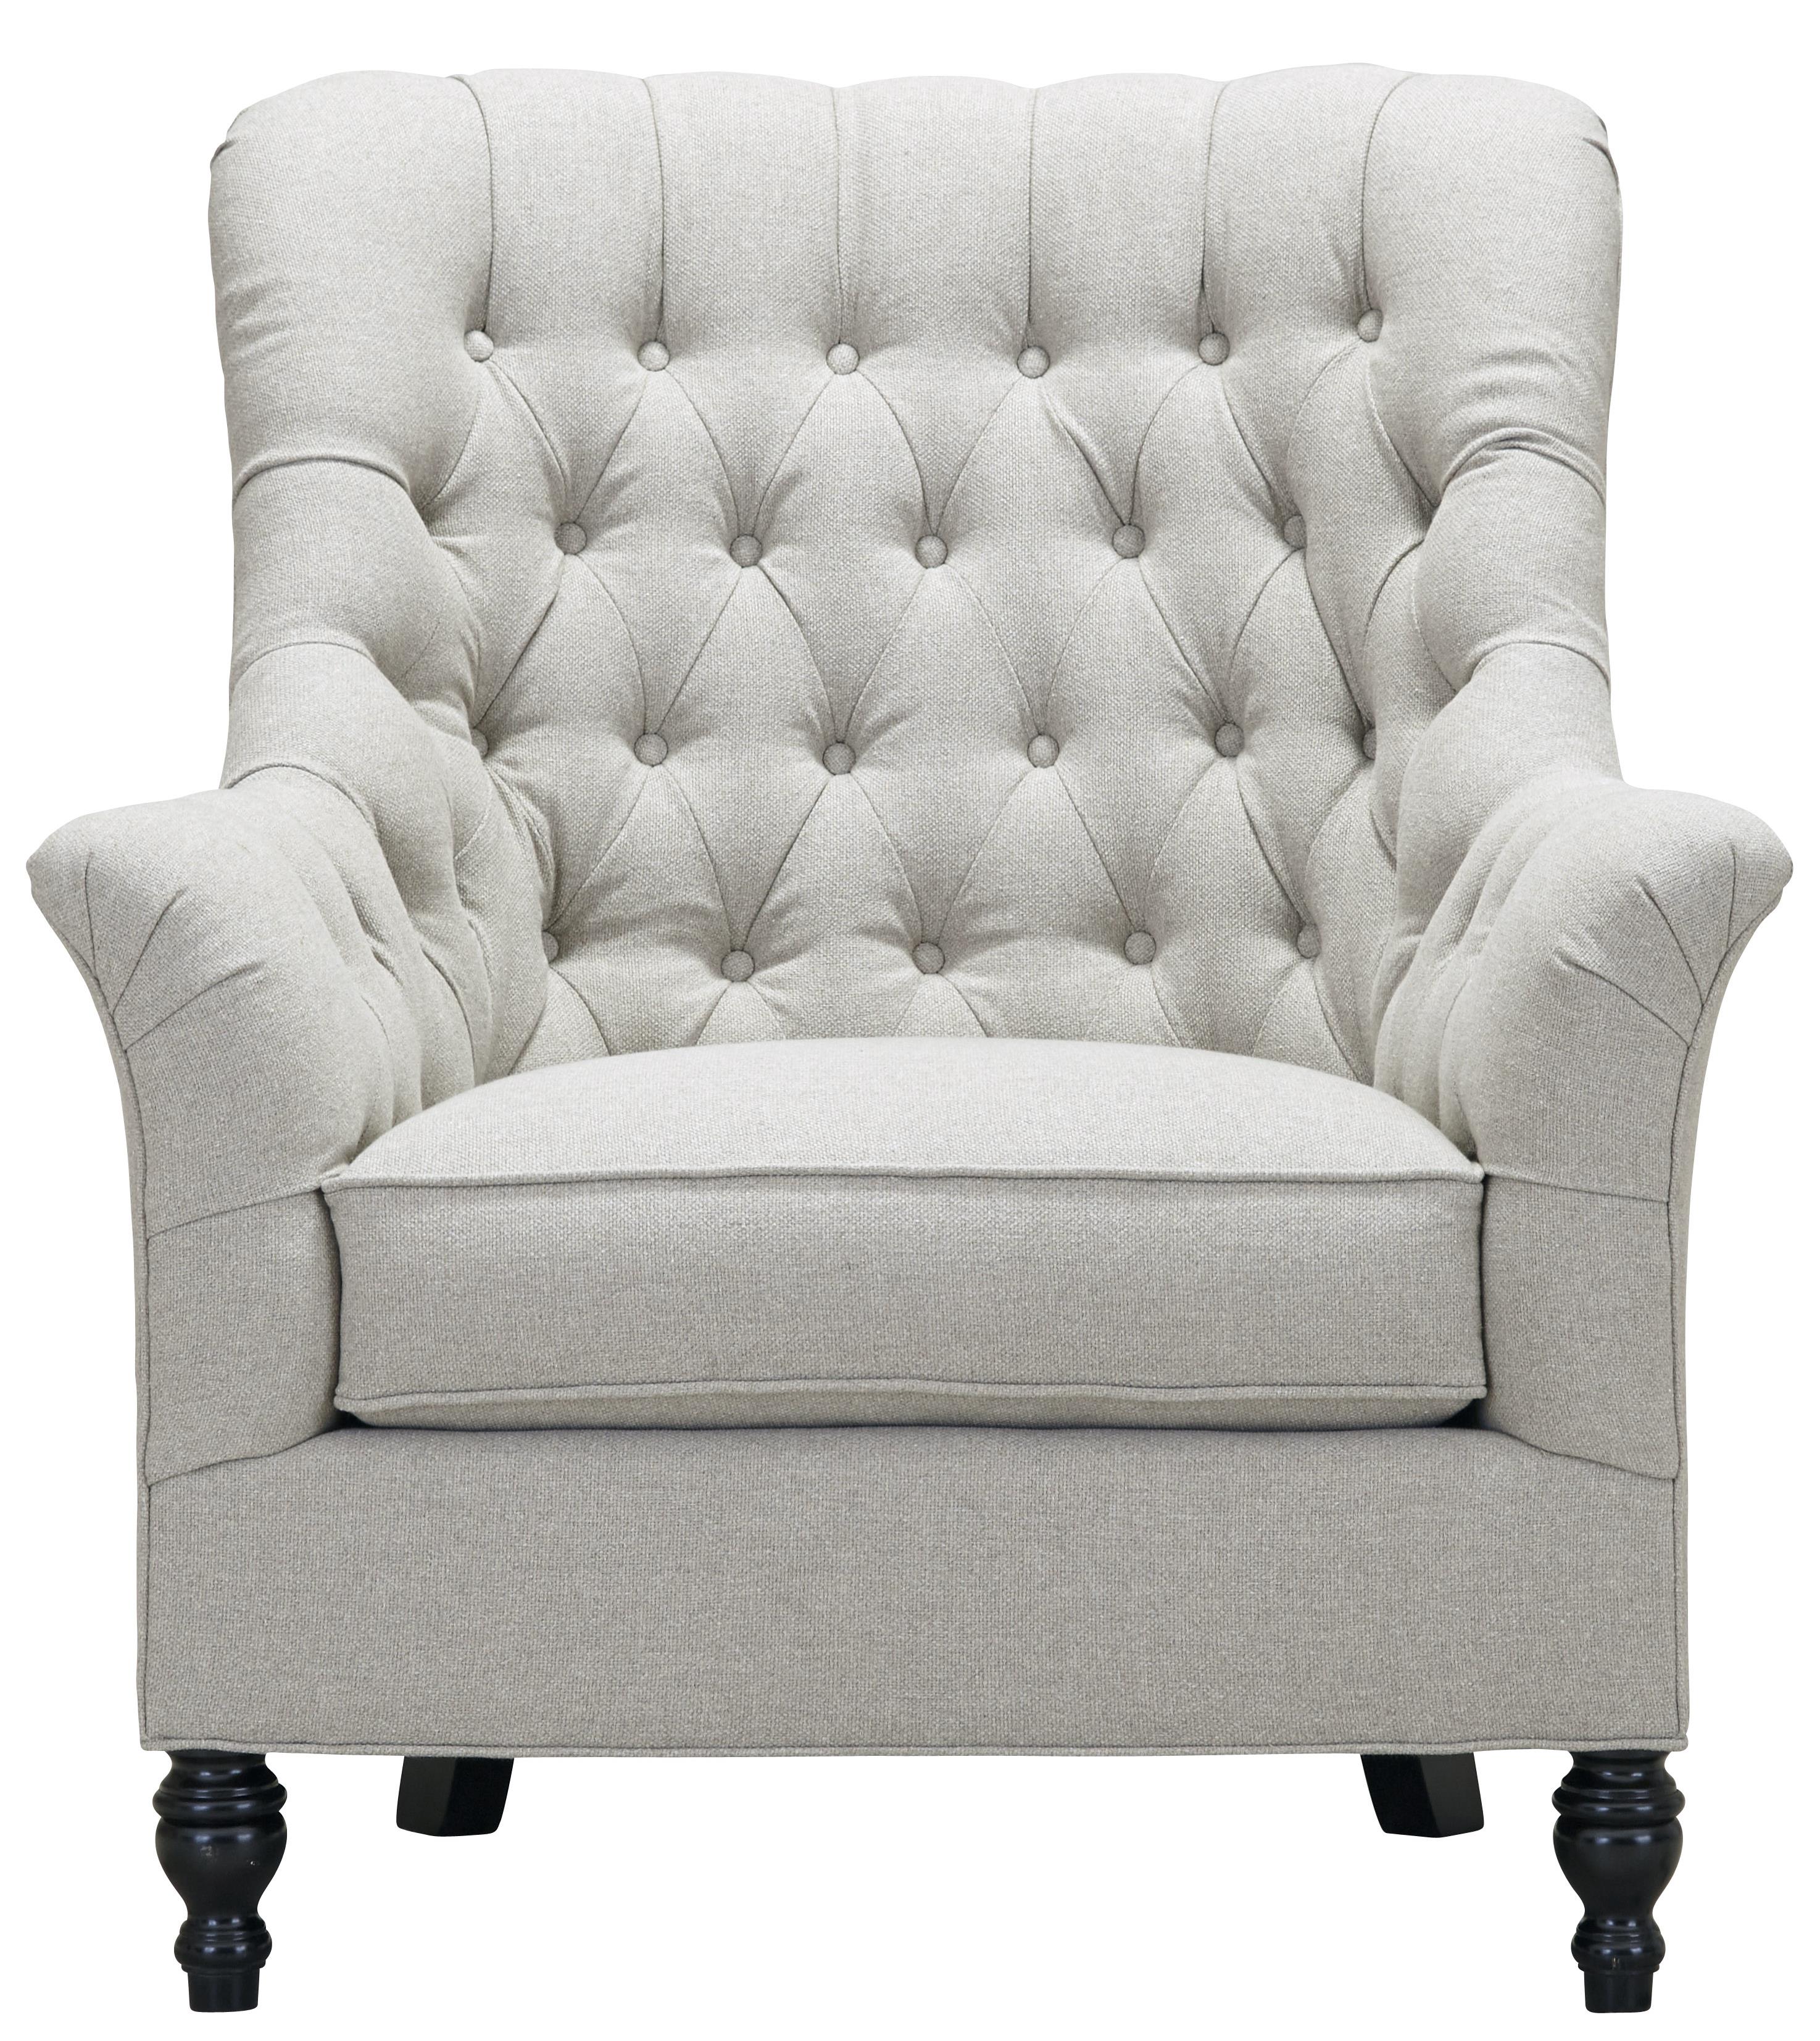 Upholstered Chair with Exposed Wooden Legs and Tufted Back